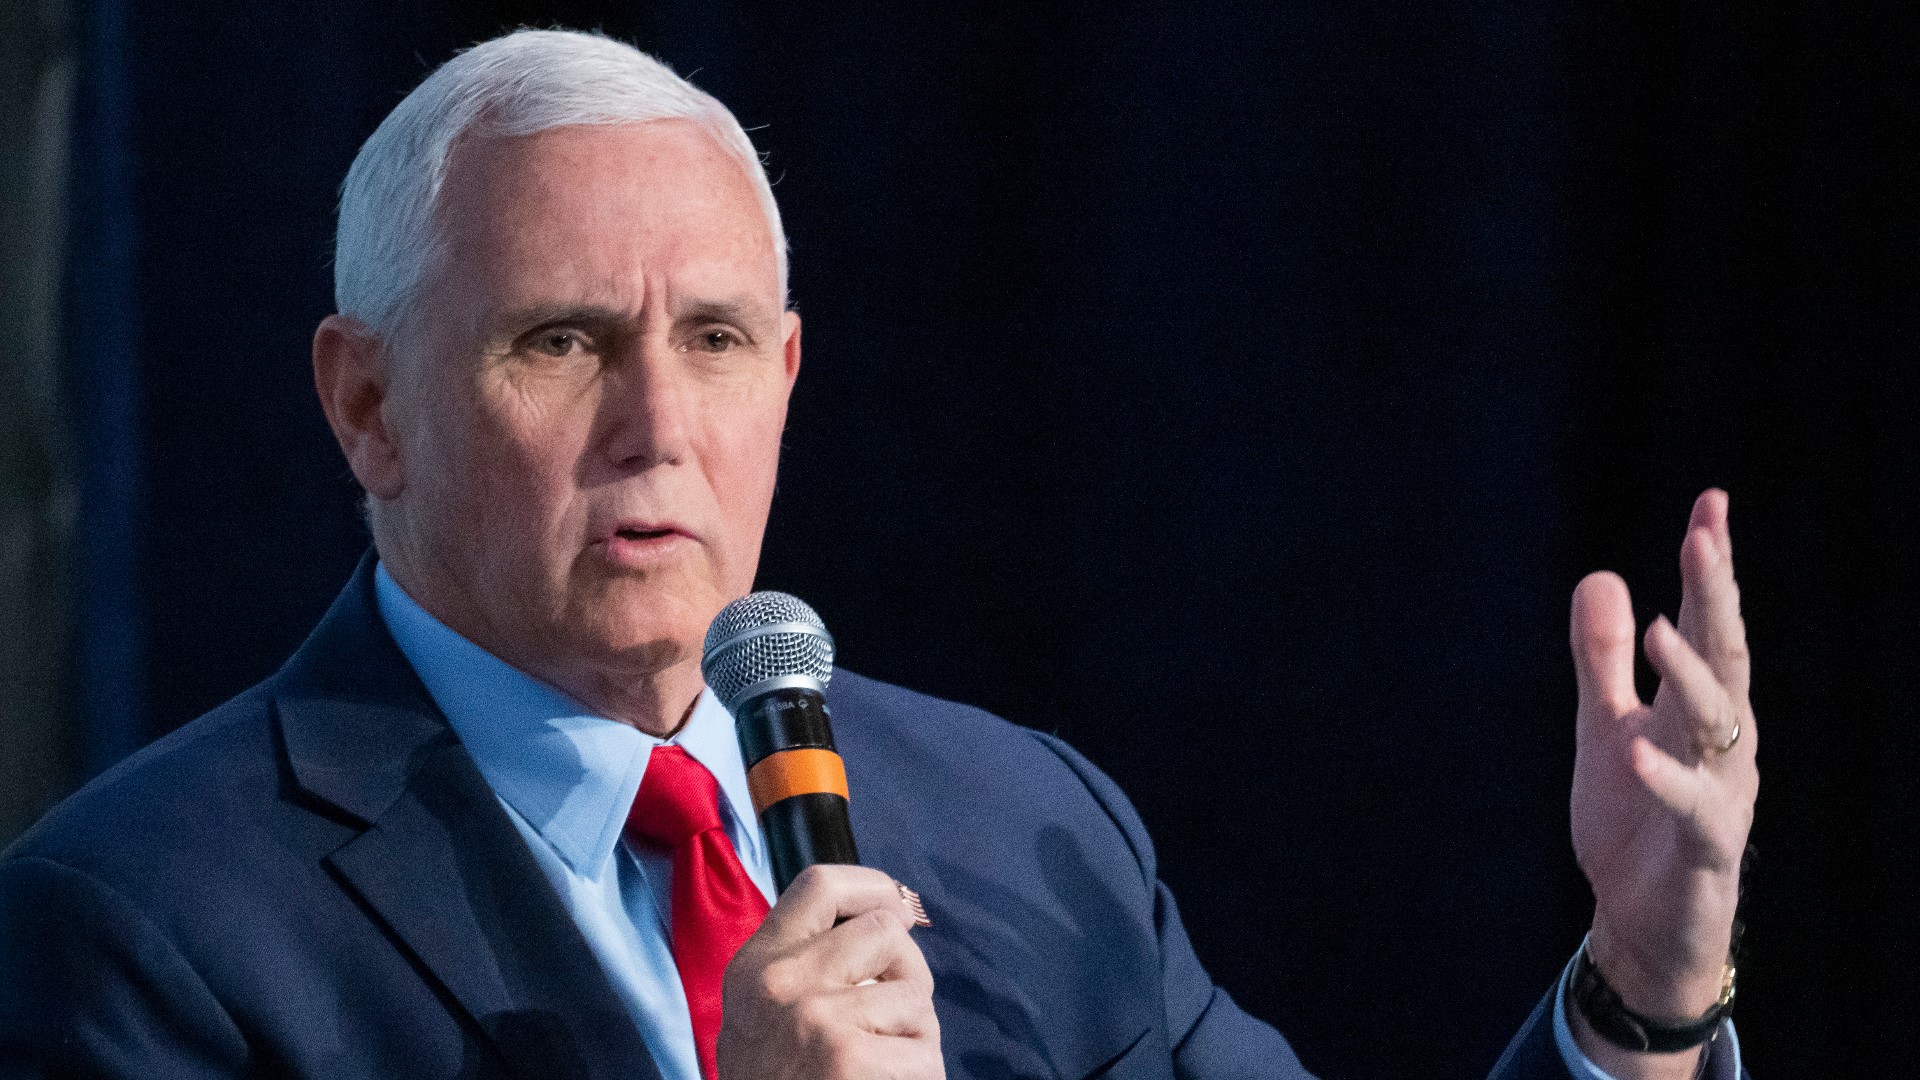 Pence's testimony comes as he hints at entering the 2024 presidential race and a potential run against Trump.